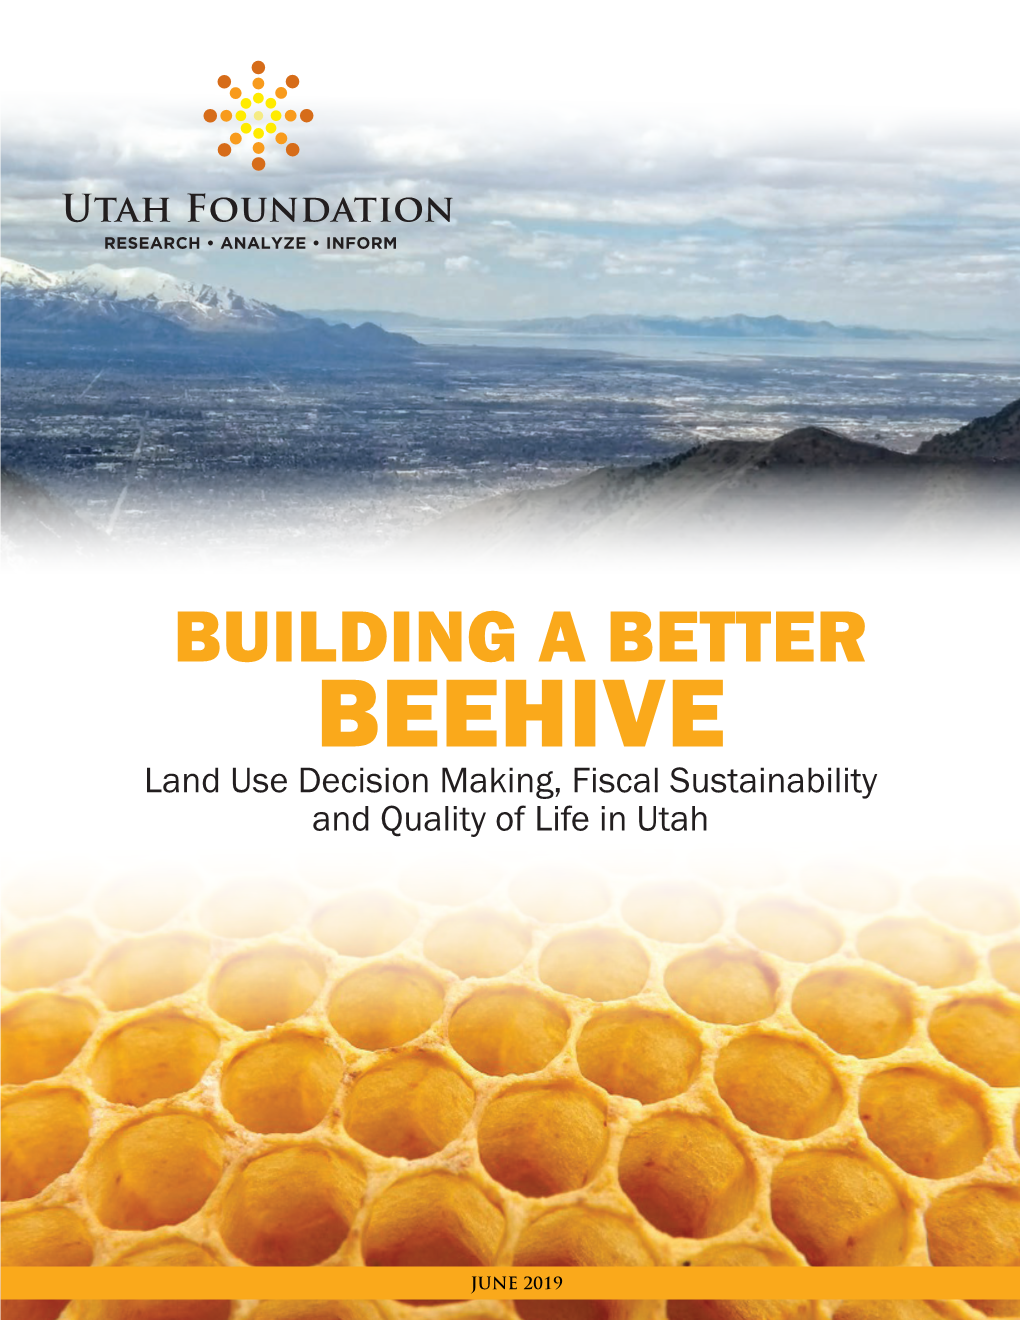 Building a Better Beehive Land Use Decision Making, Fiscal Sustainability and Quality of Life in Utah